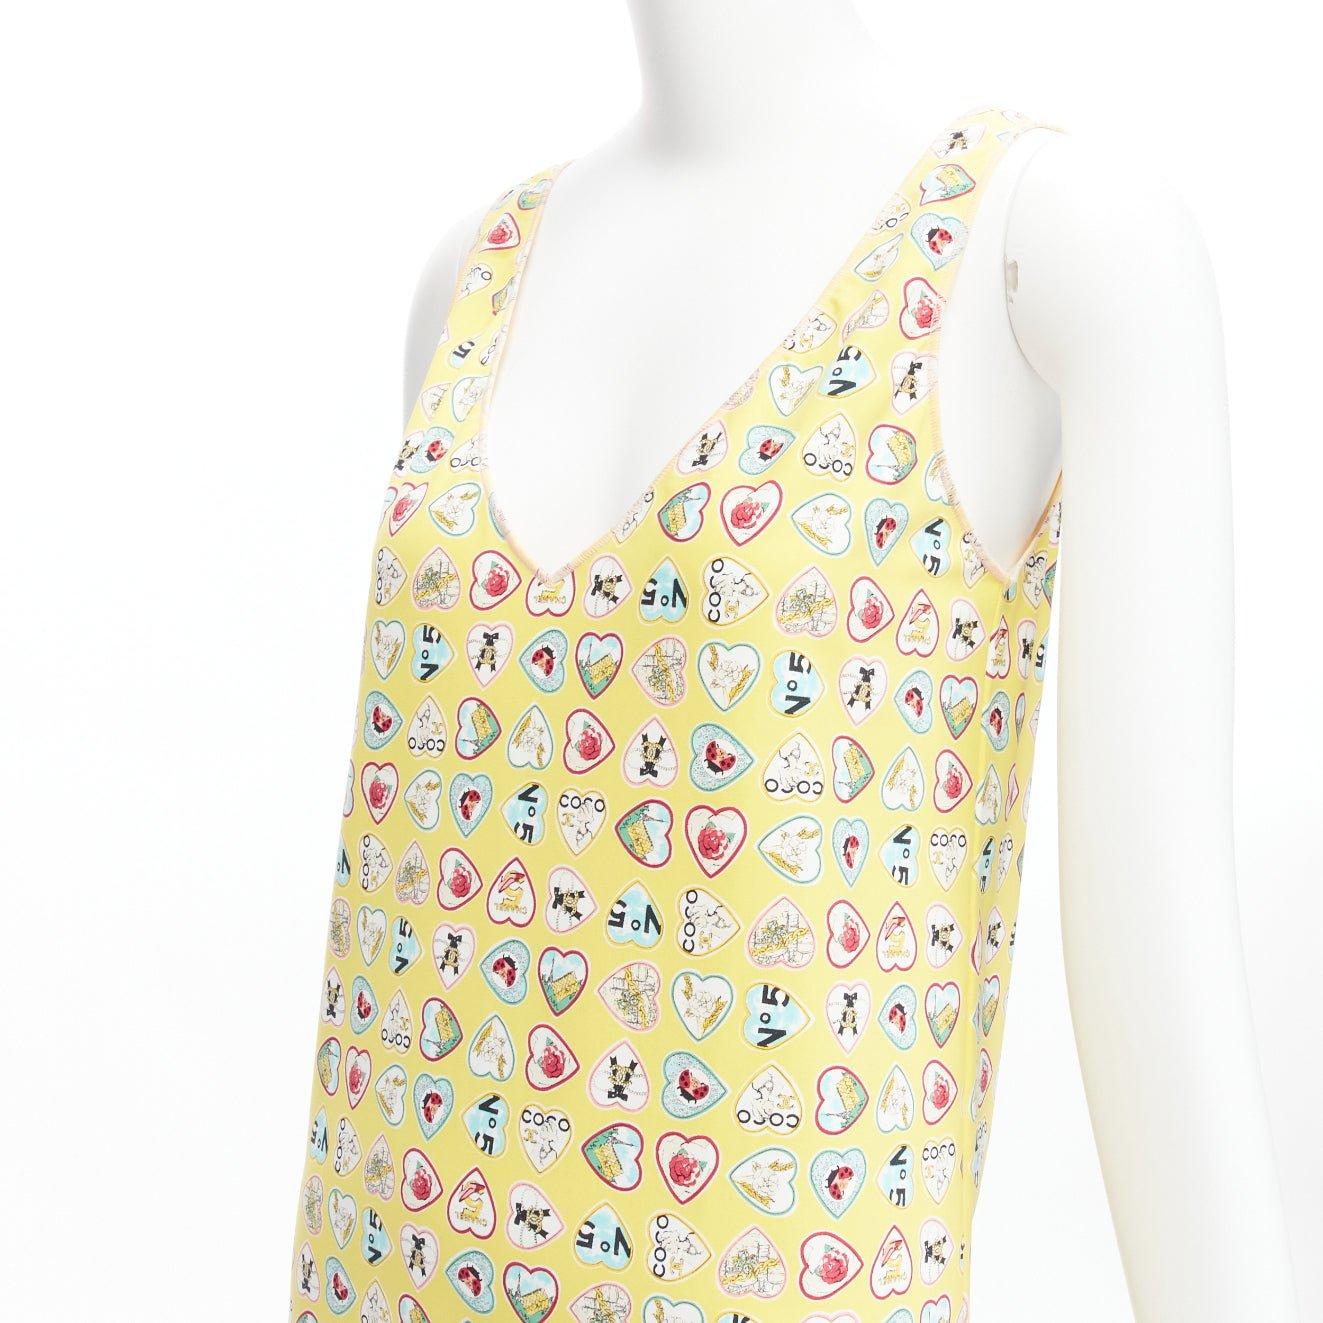 rare CHANEL 06P yellow Coco No 5 CC logo heart print V neck mini shift dress FR38 M
Reference: TGAS/D00454
Brand: Chanel
Designer: Karl Lagerfeld
Collection: 06P
Material: Polyamide, Elastane
Color: Yellow, Multicolour
Pattern: Abstract
Closure: